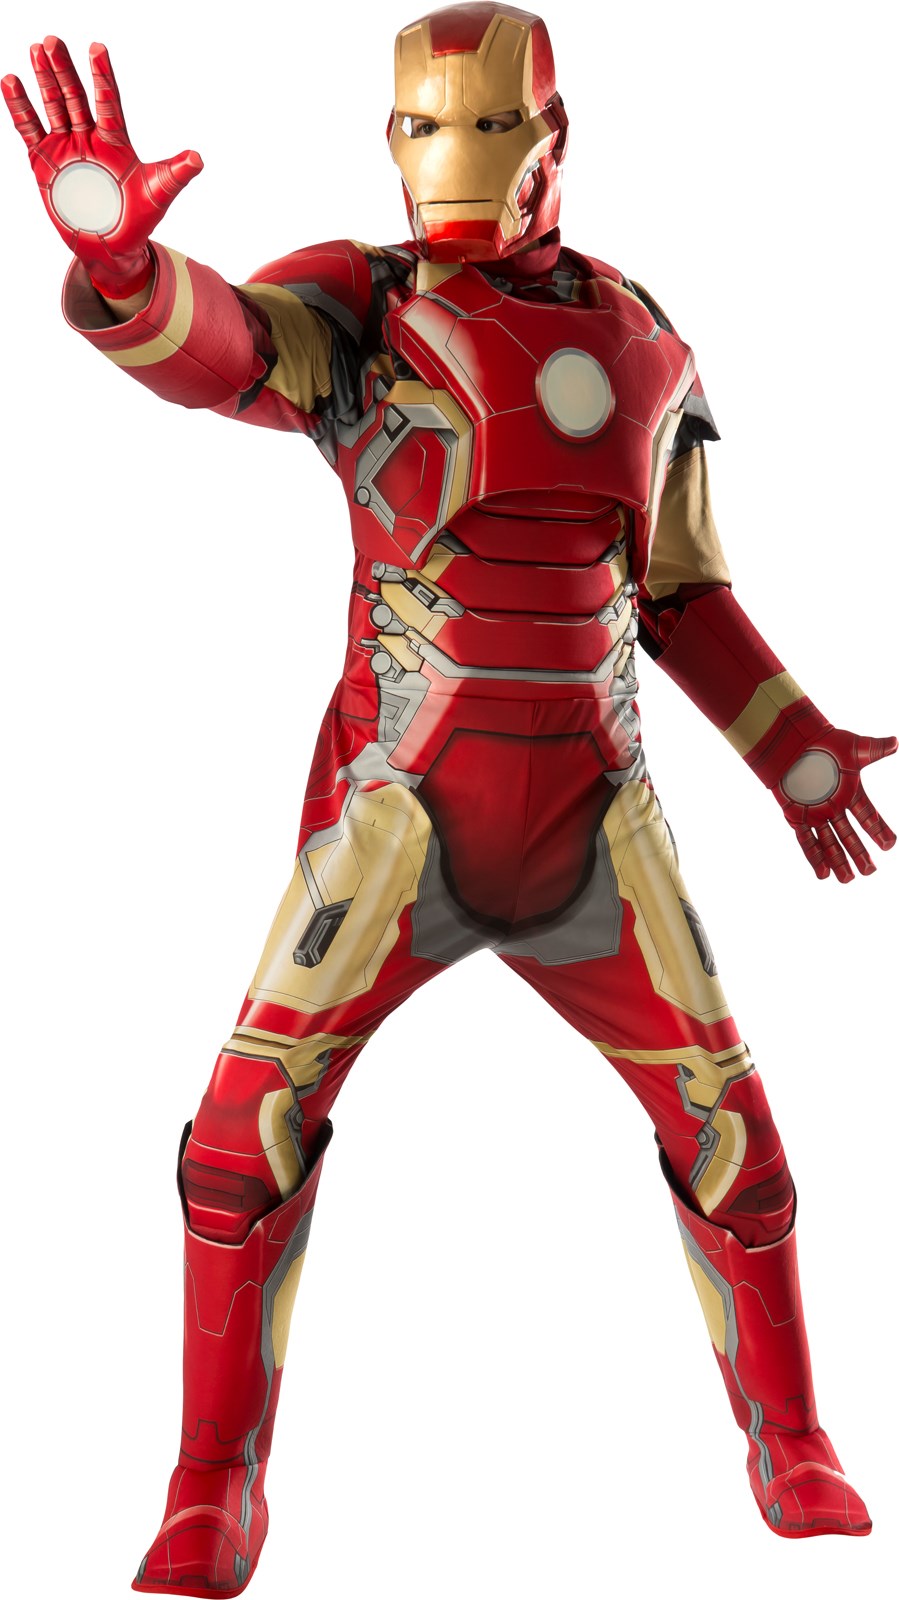 Avengers 2 - Age of Ultron: Deluxe Iron Man &quot;Mark 43&quot; Costume For Men